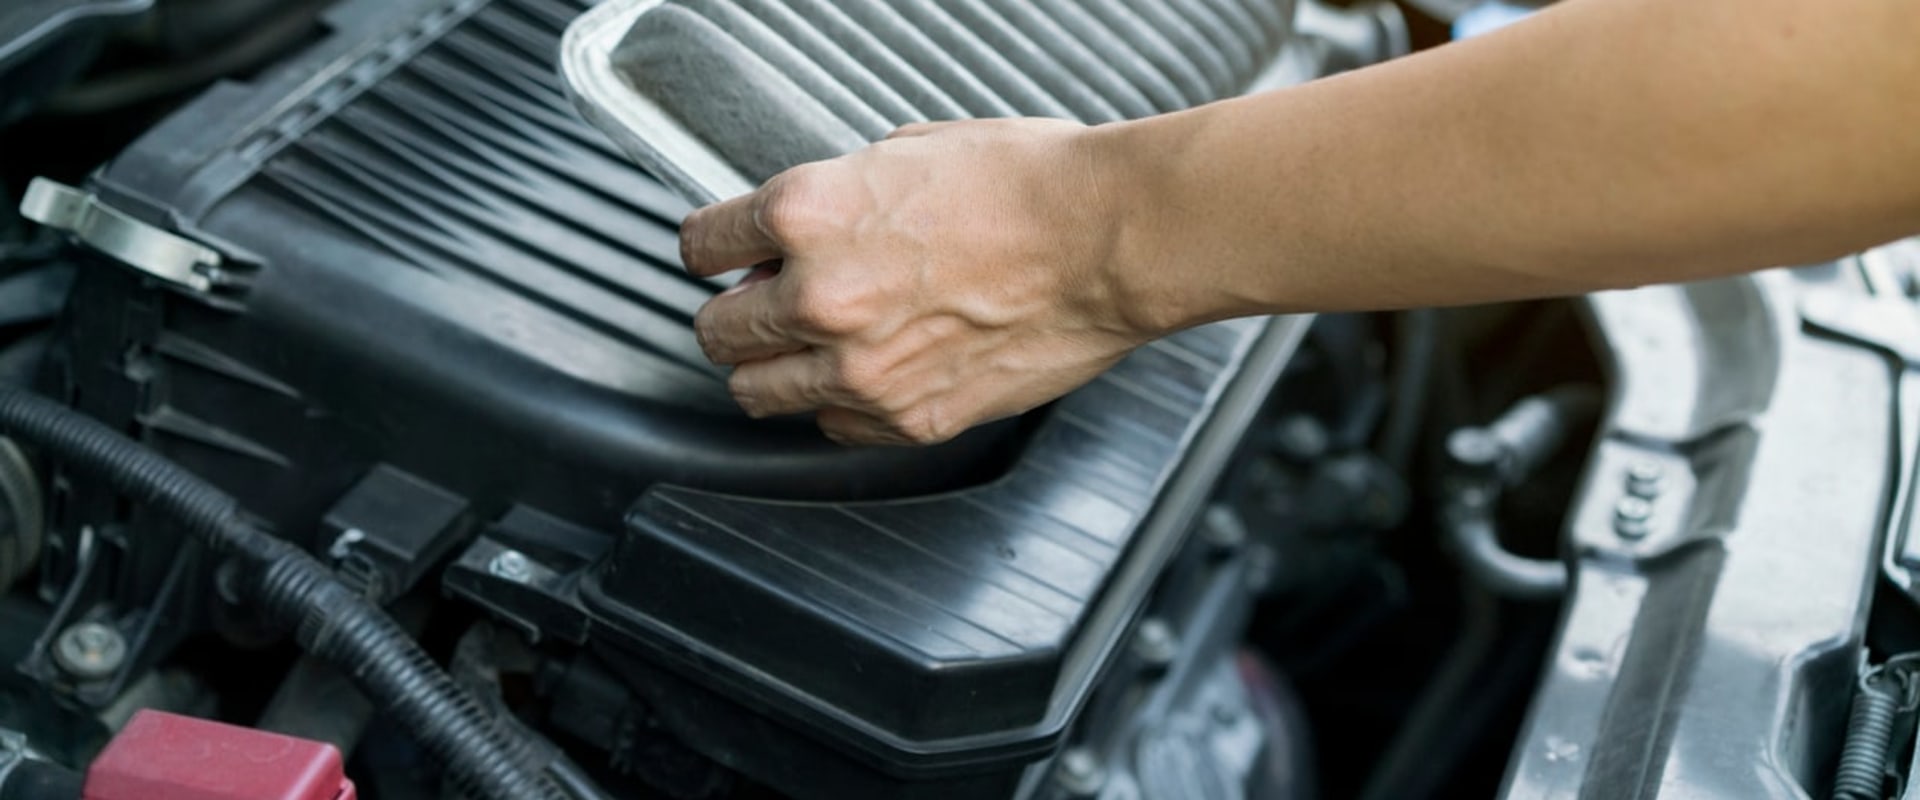 How Long Should You Replace Your Car's Air Filter?